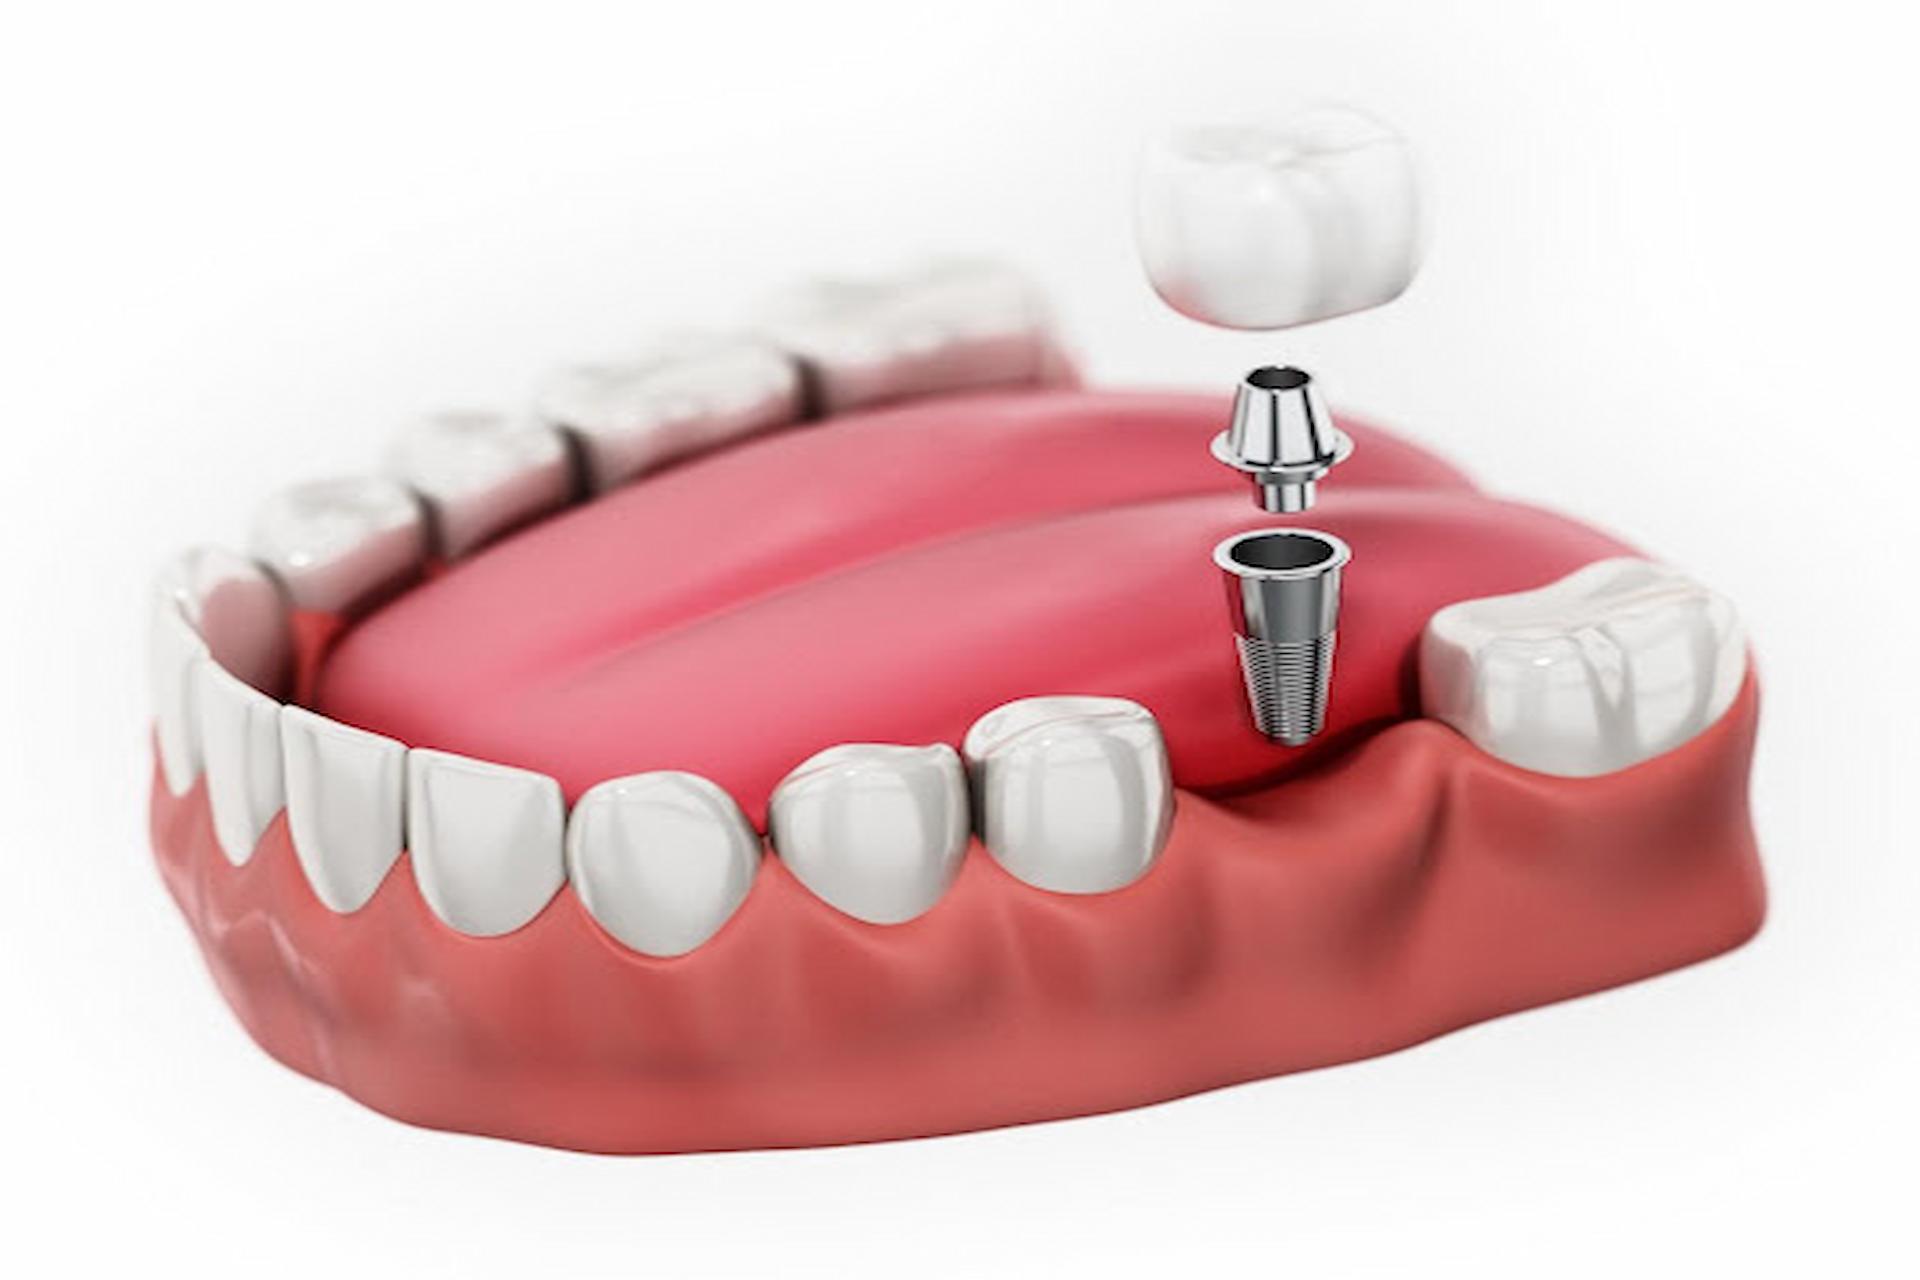 Dental Bridge & Dental Implant, Which One Is The Best Choice?